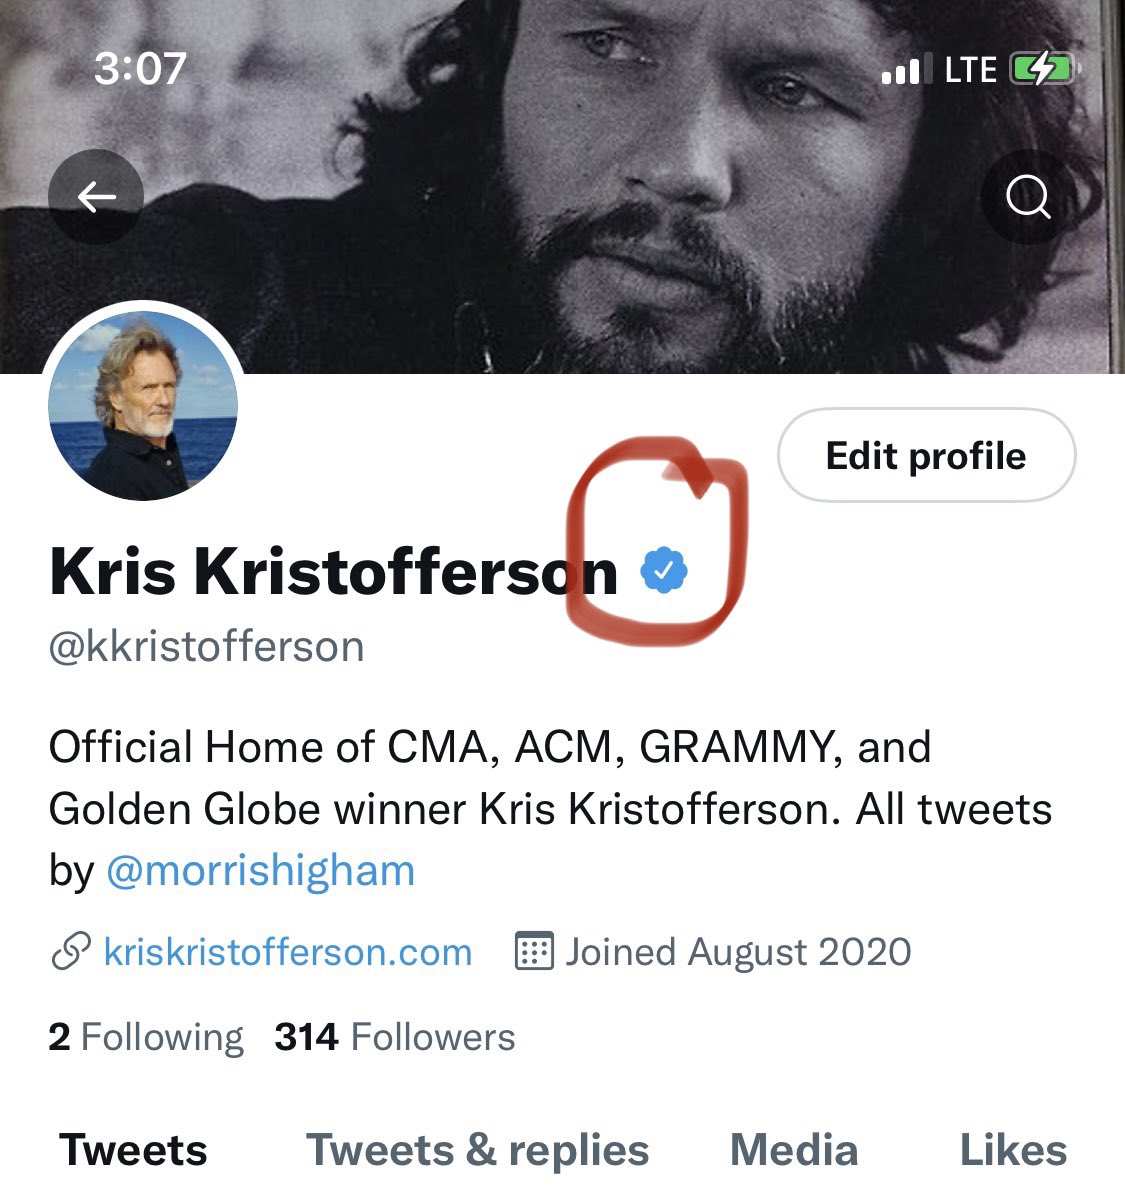 We have been receiving messages that someone out there is pretending to be Kris. The onlyaccounts are Instagram, Twitter and Facebook and are verified with a blue checkmark. If you have been contacted by anyone other than through his verified accounts, please report.